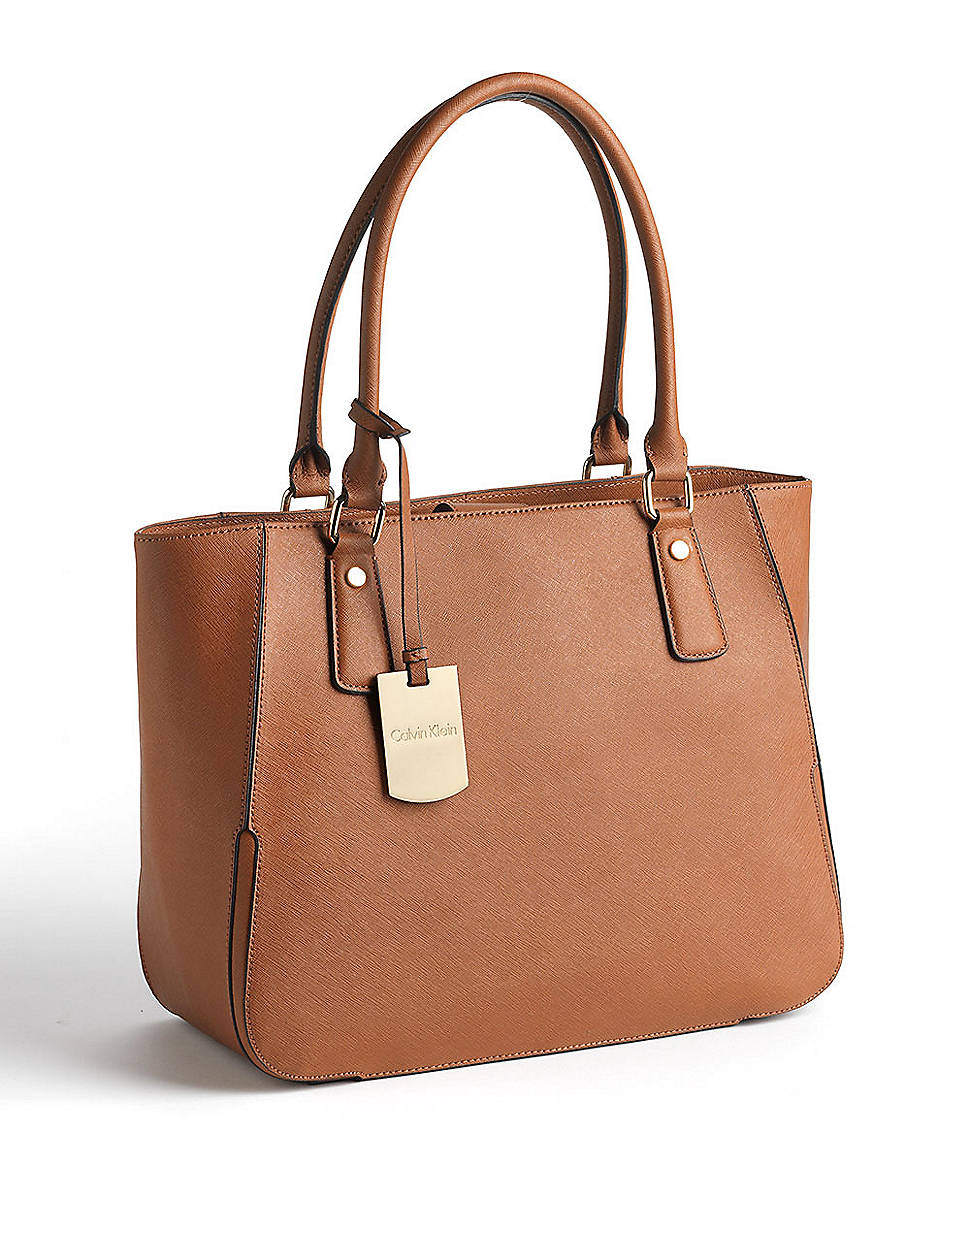 Calvin Klein Saffiano Leather Tote Bag in Brown (LUGGAGE) | Lyst